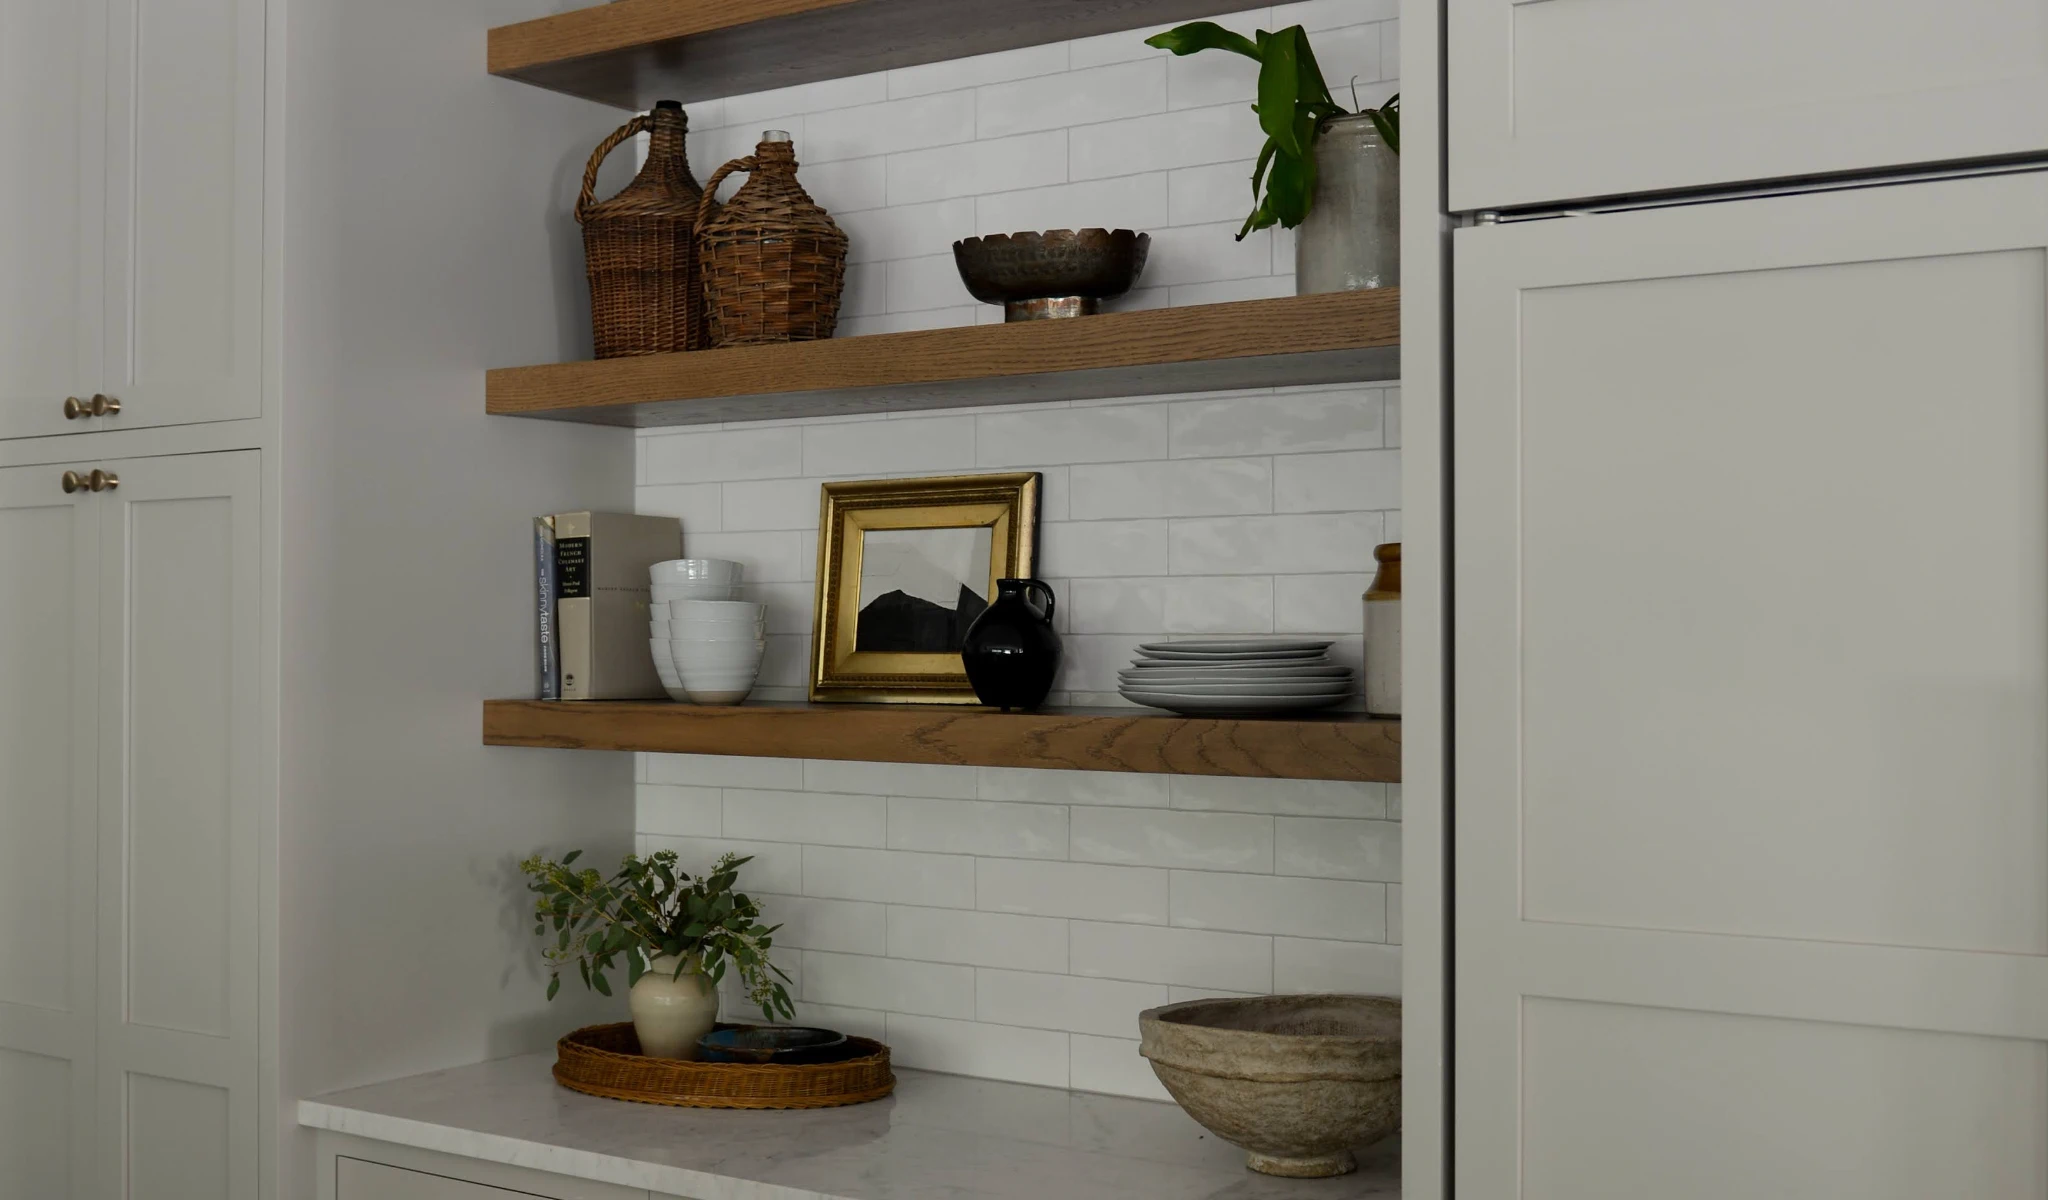 A white kitchen with wooden shelves and a potted plant.